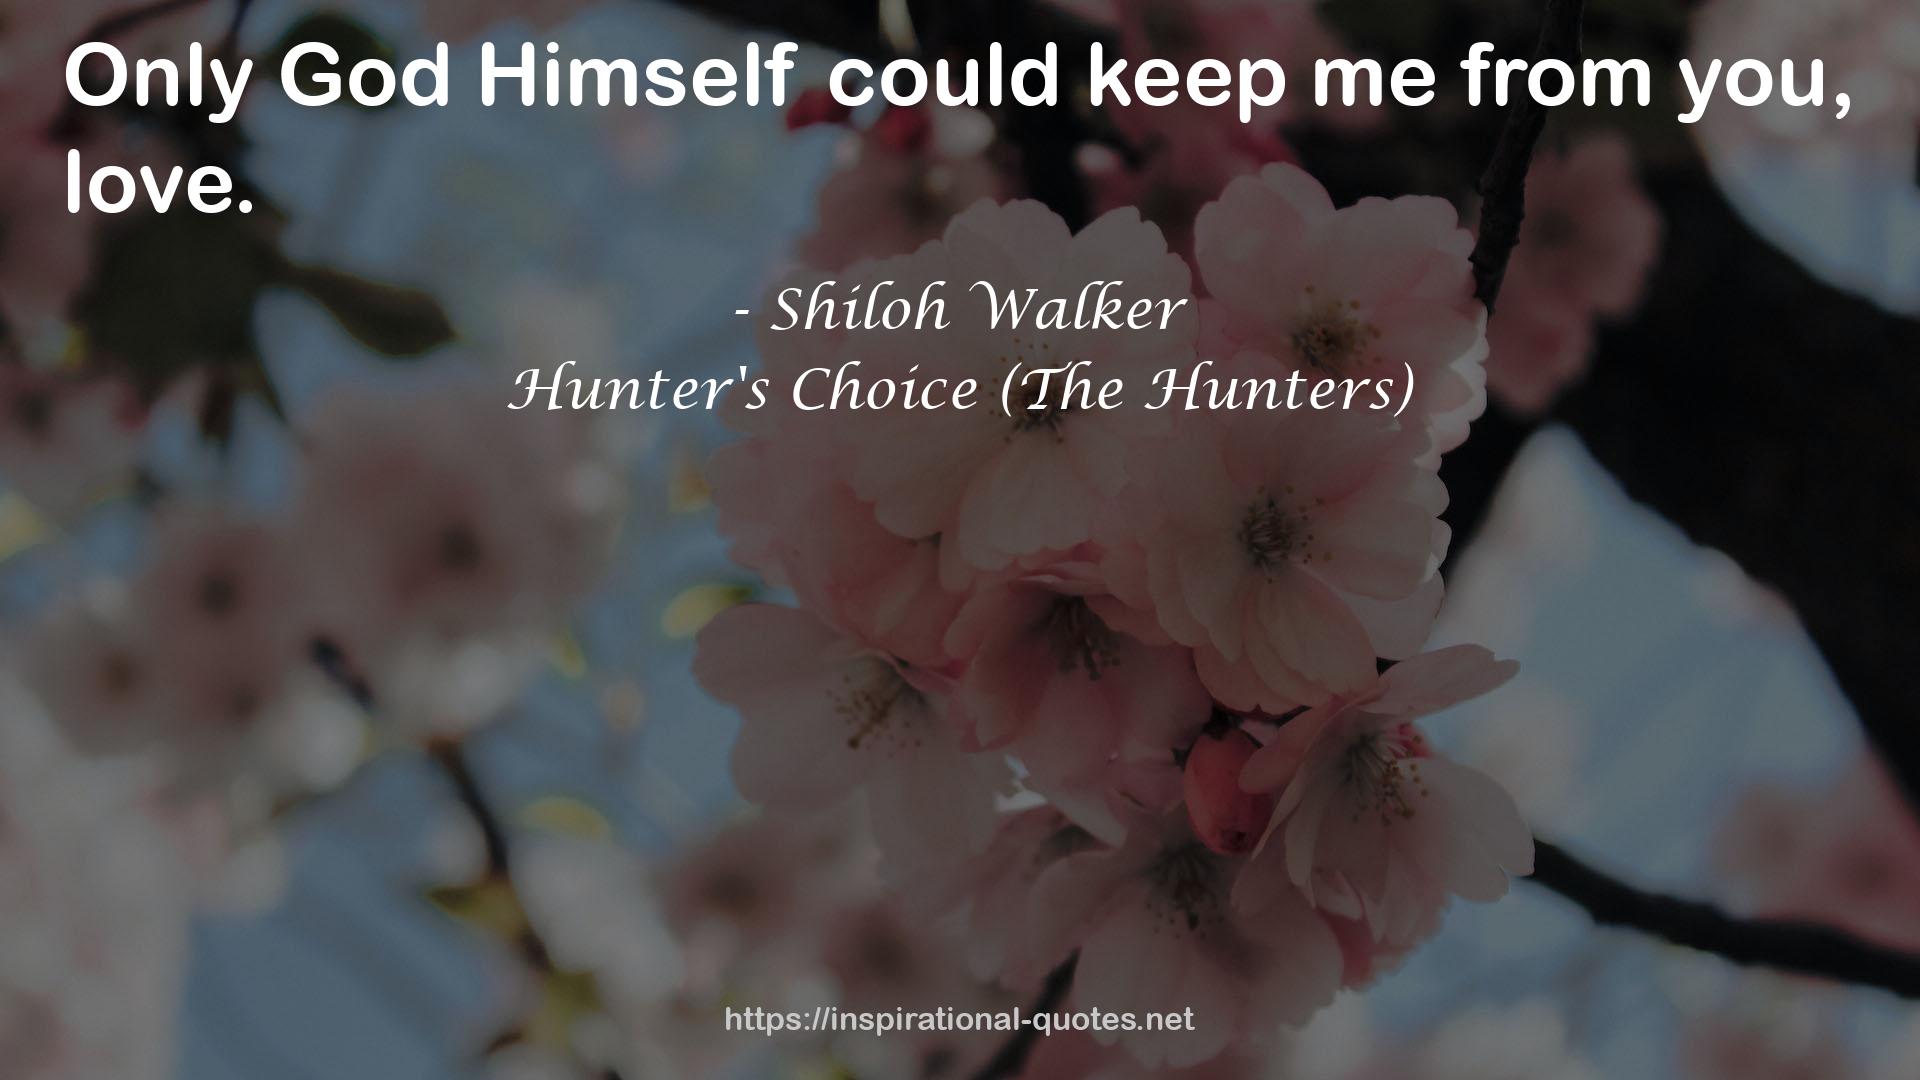 Hunter's Choice (The Hunters) QUOTES